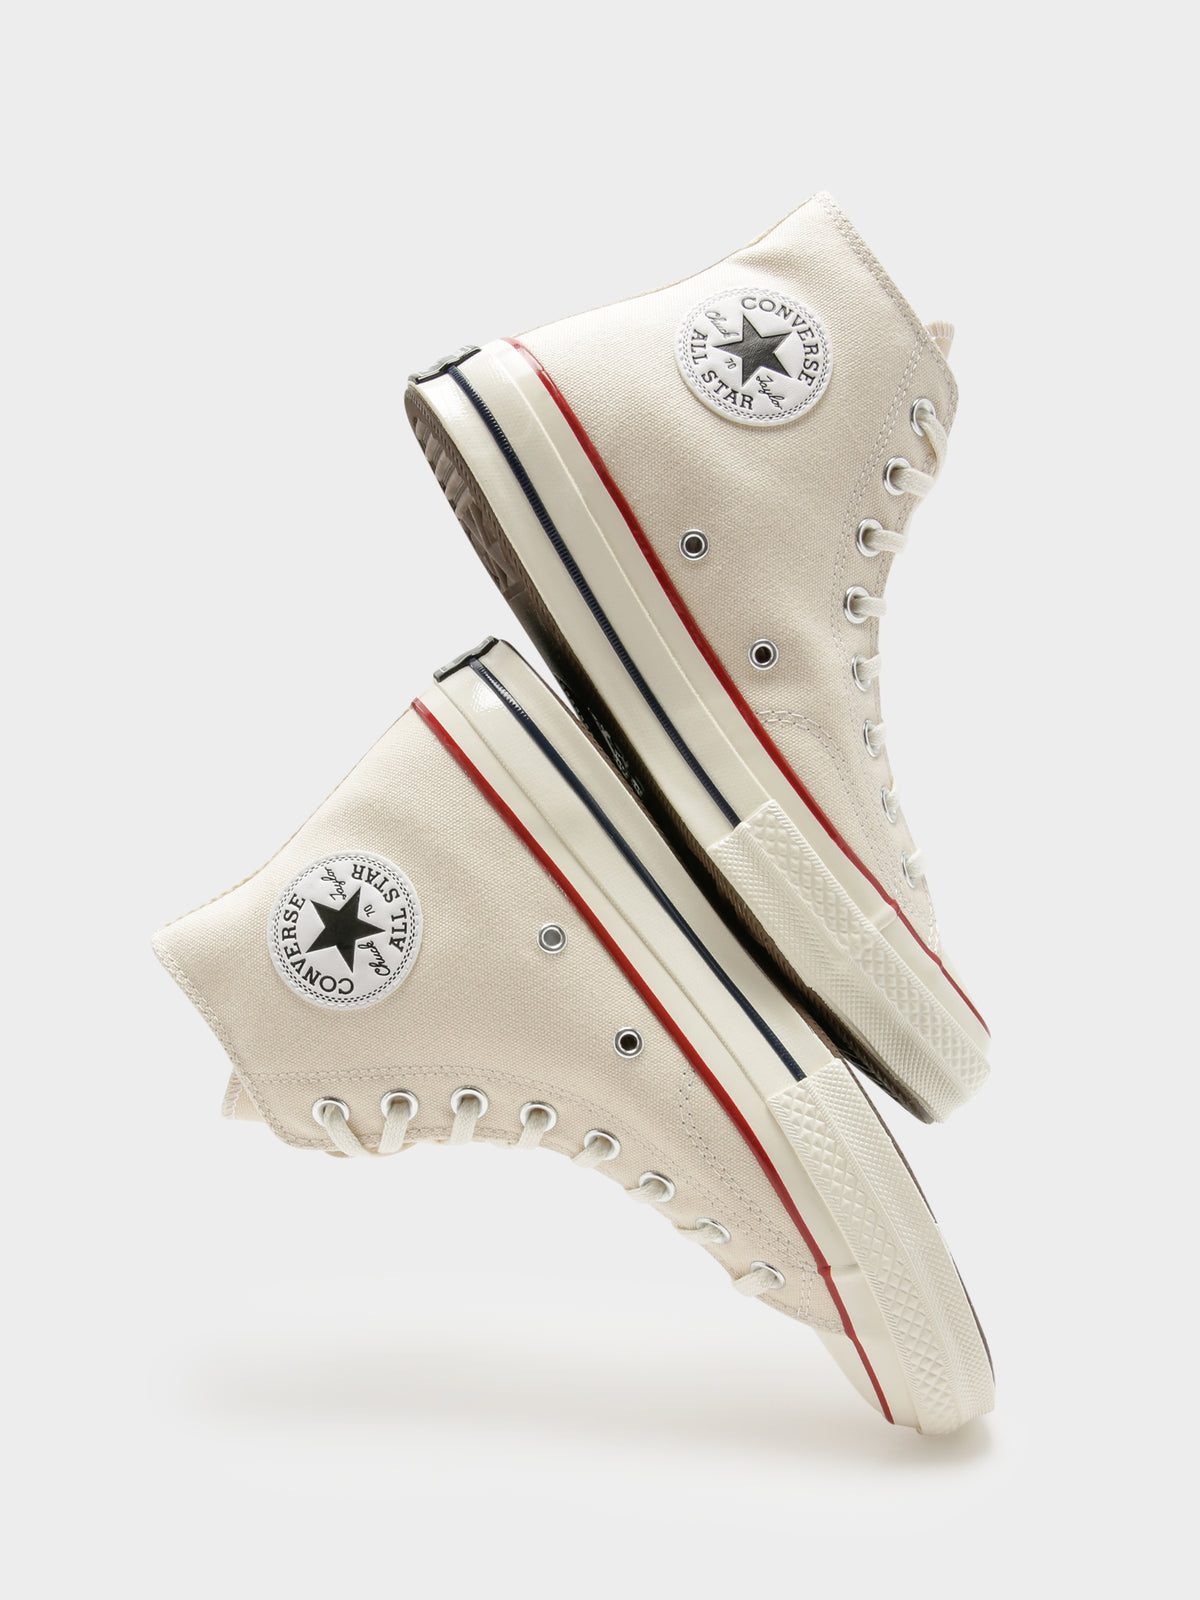 Unisex Chuck Taylor All Star 70 High Top Sneakers in Parchment